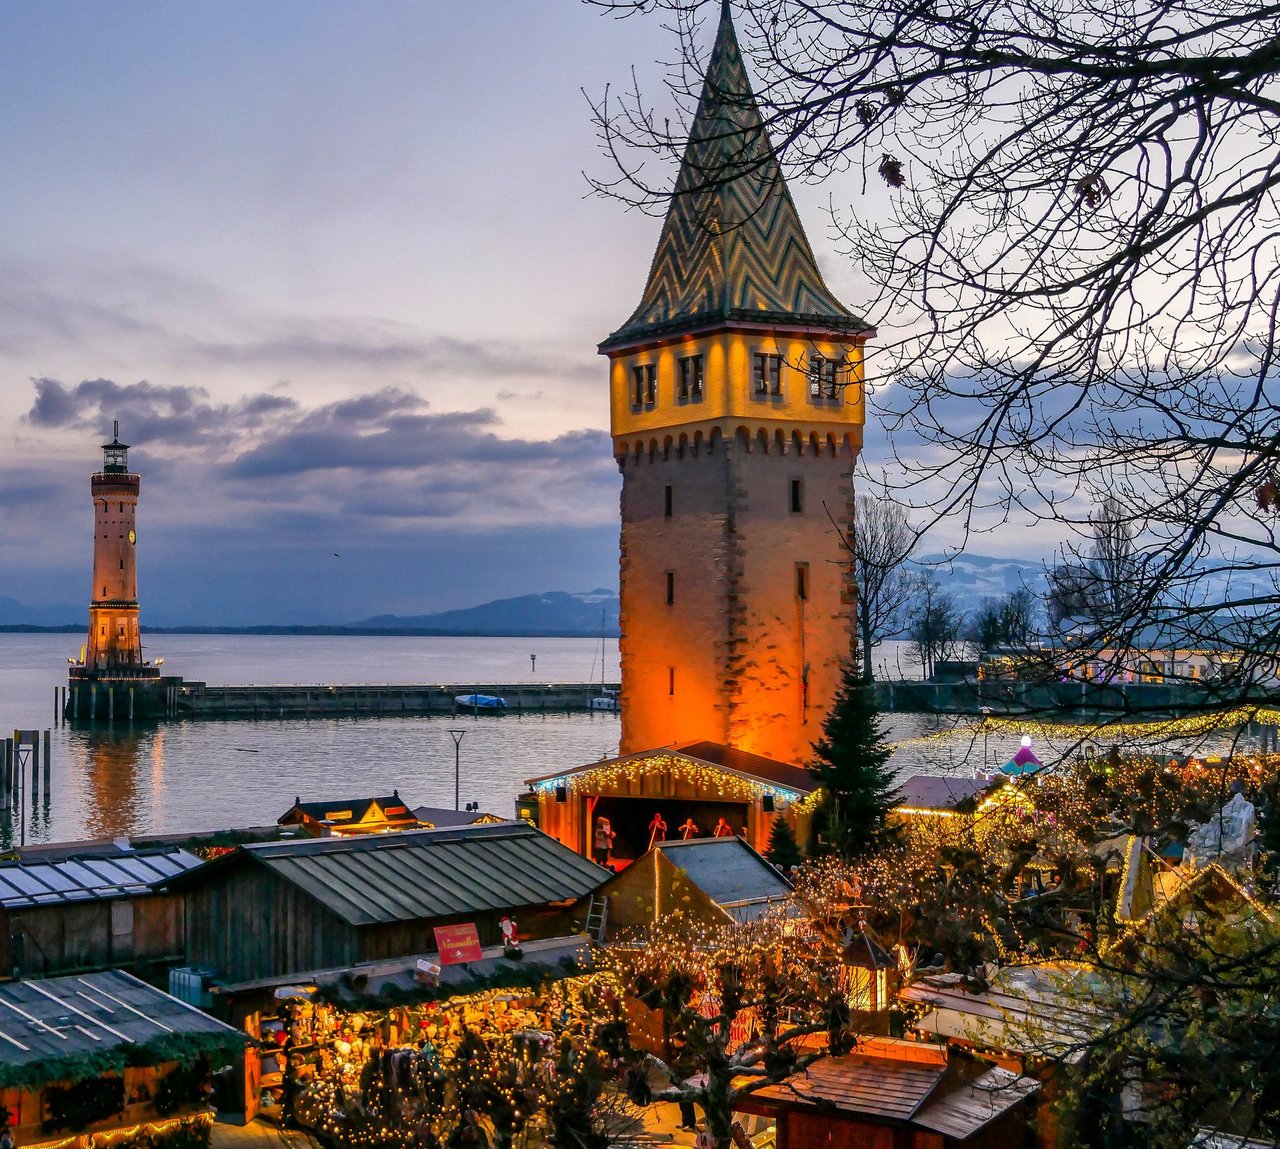 Visit the magical Christmas Island in Lindau, Germany.  The city is situated on an island and it is transformed into a real Christmas island every weekend in the festive season.  https://t.co/QiO6cQMVhx